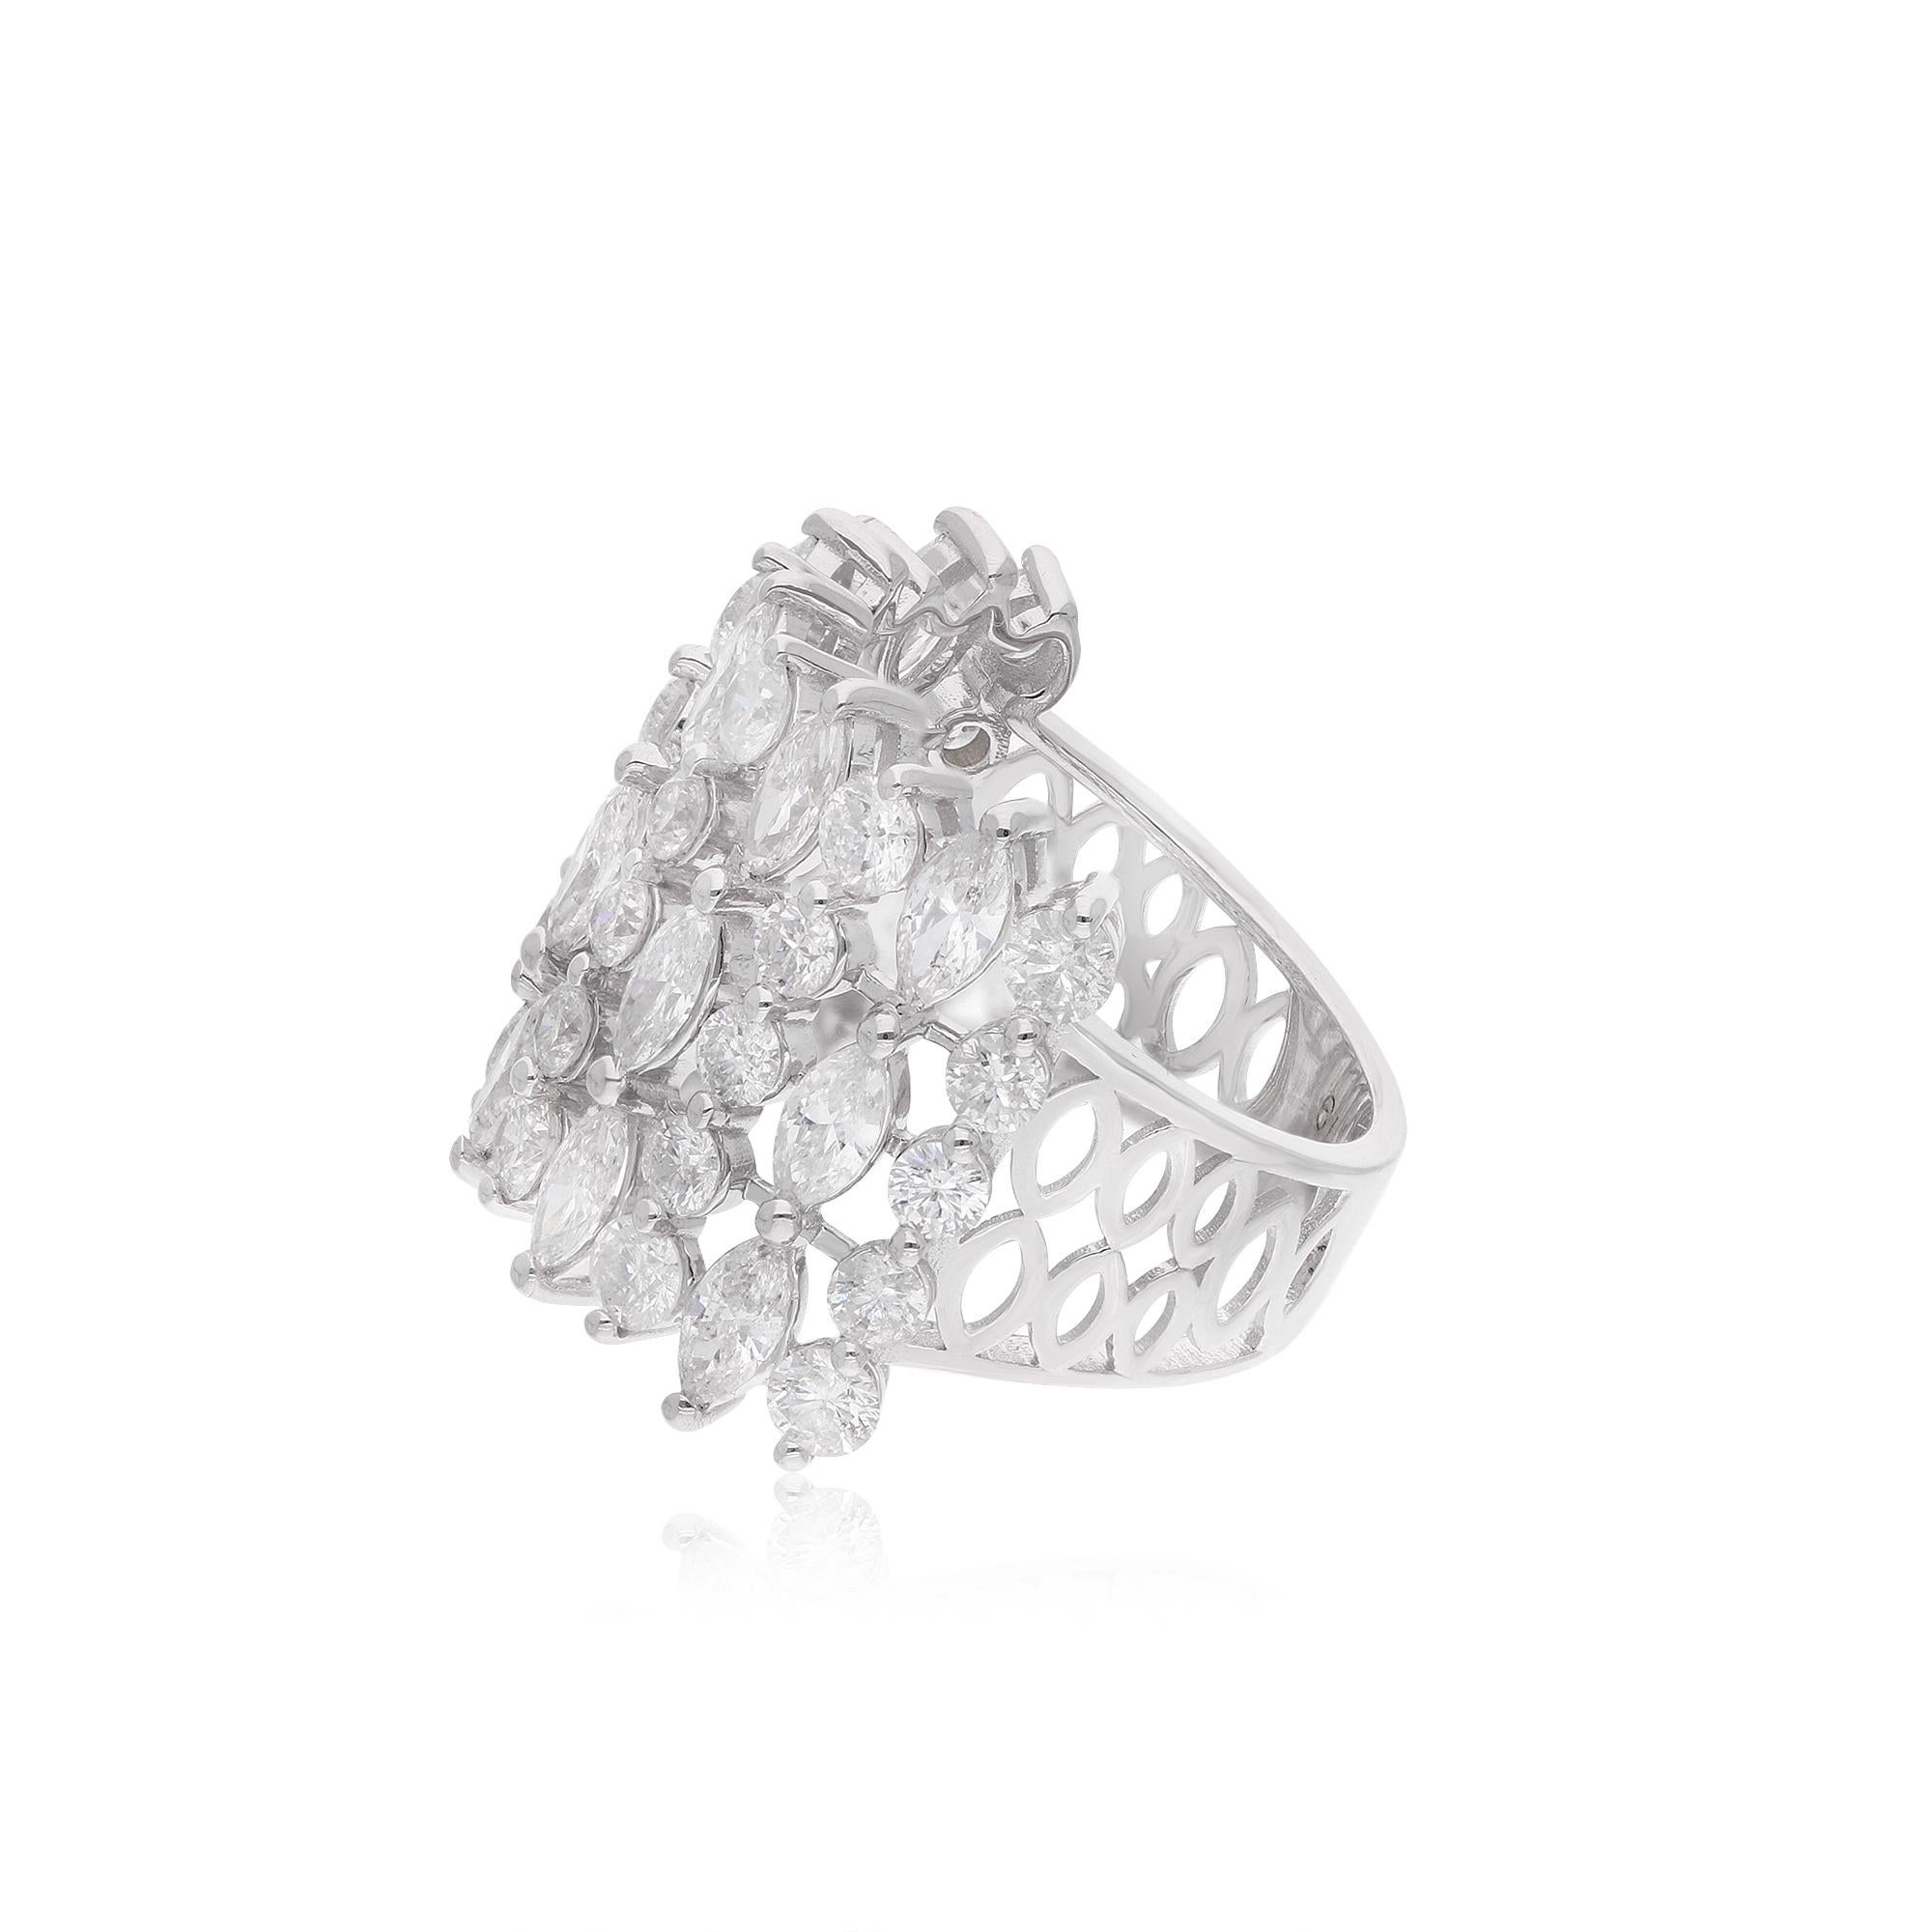 Crafted in solid 14k Gold, this ring features a cluster of sparkling diamonds, creating a truly dazzling effect. The diamonds are expertly set in a secure prong setting, ensuring that they stay in place and catch the light at every angle.

This is a